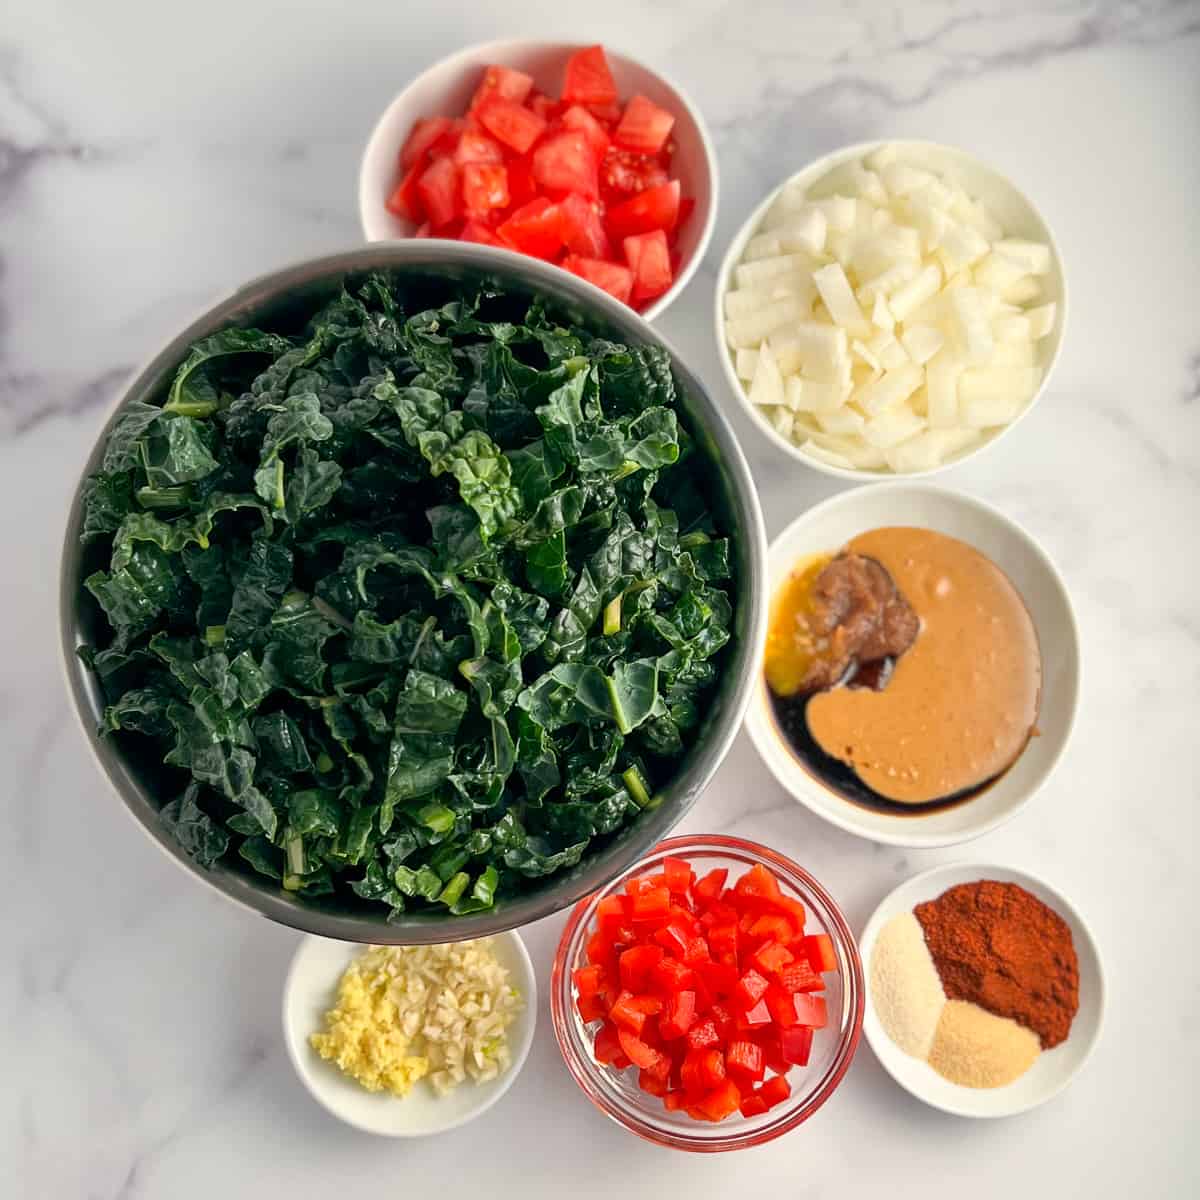 top view of the ingredients for peanut butter greens: kale, tomato, onion, garlic, ginger, bell pepper, peanut butter, Simple Homemade Date Syrup, Scotch Bonnet pepper sauce, coconut aminos, smoked paprika, garlic powder, onion powder